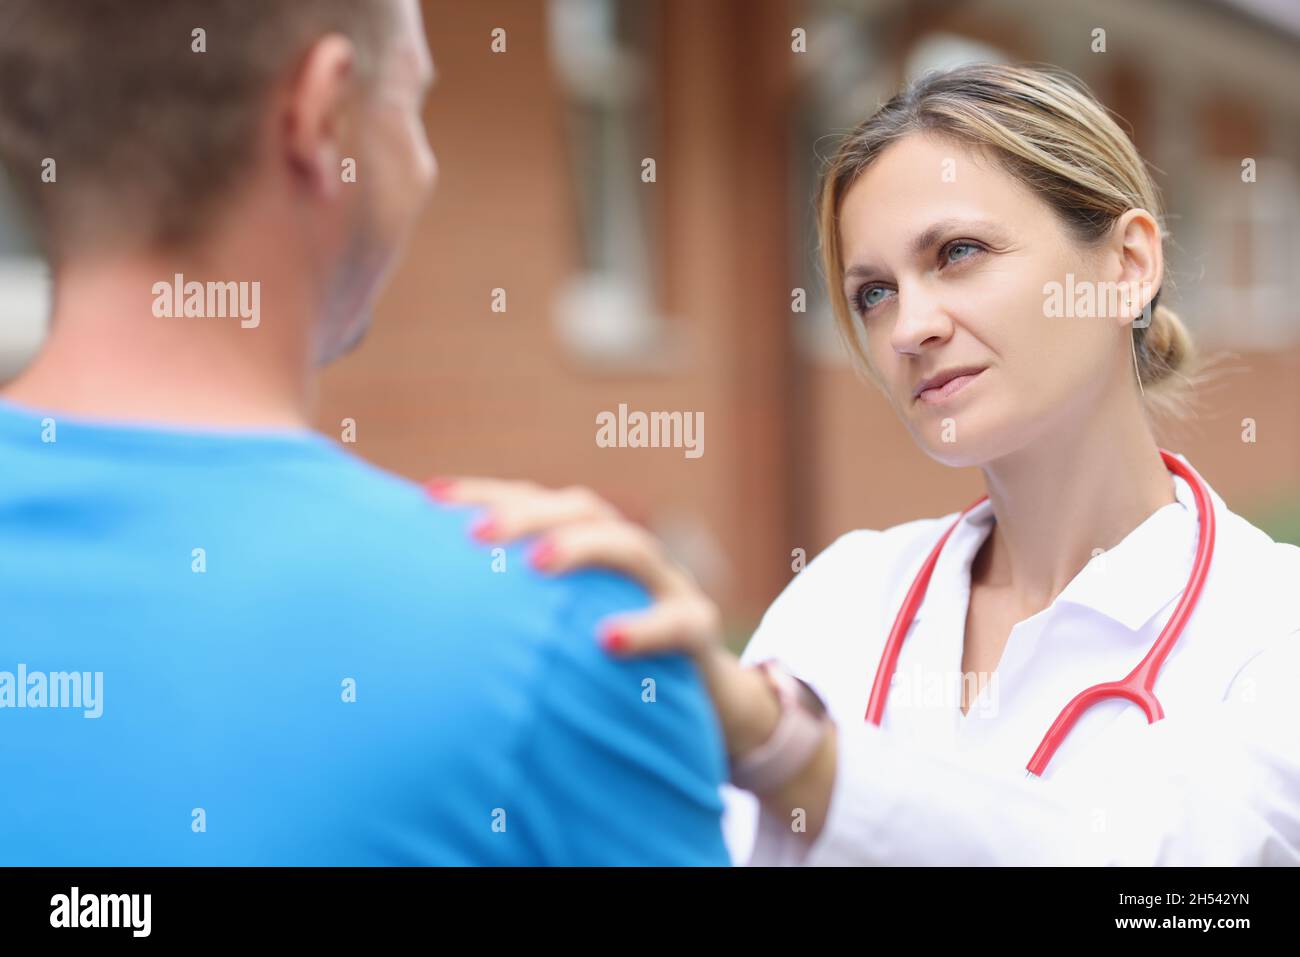 Woman doctor putting hand on patient shoulder to calm down Stock Photo